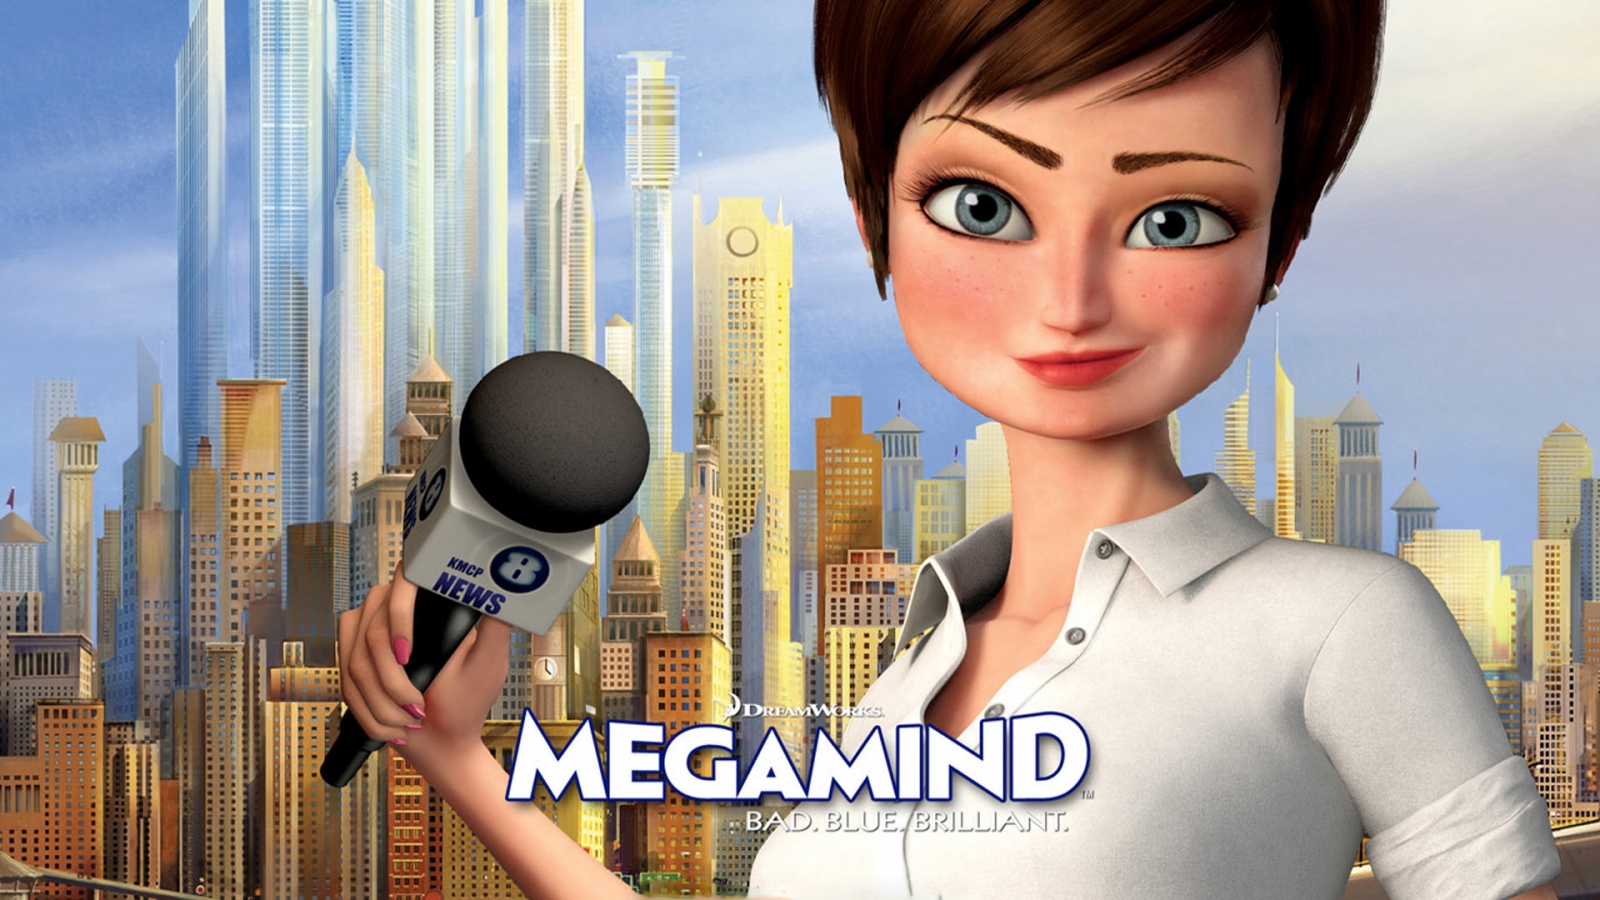 Megamind Roxanne Ritchie for 1600 x 900 HDTV resolution